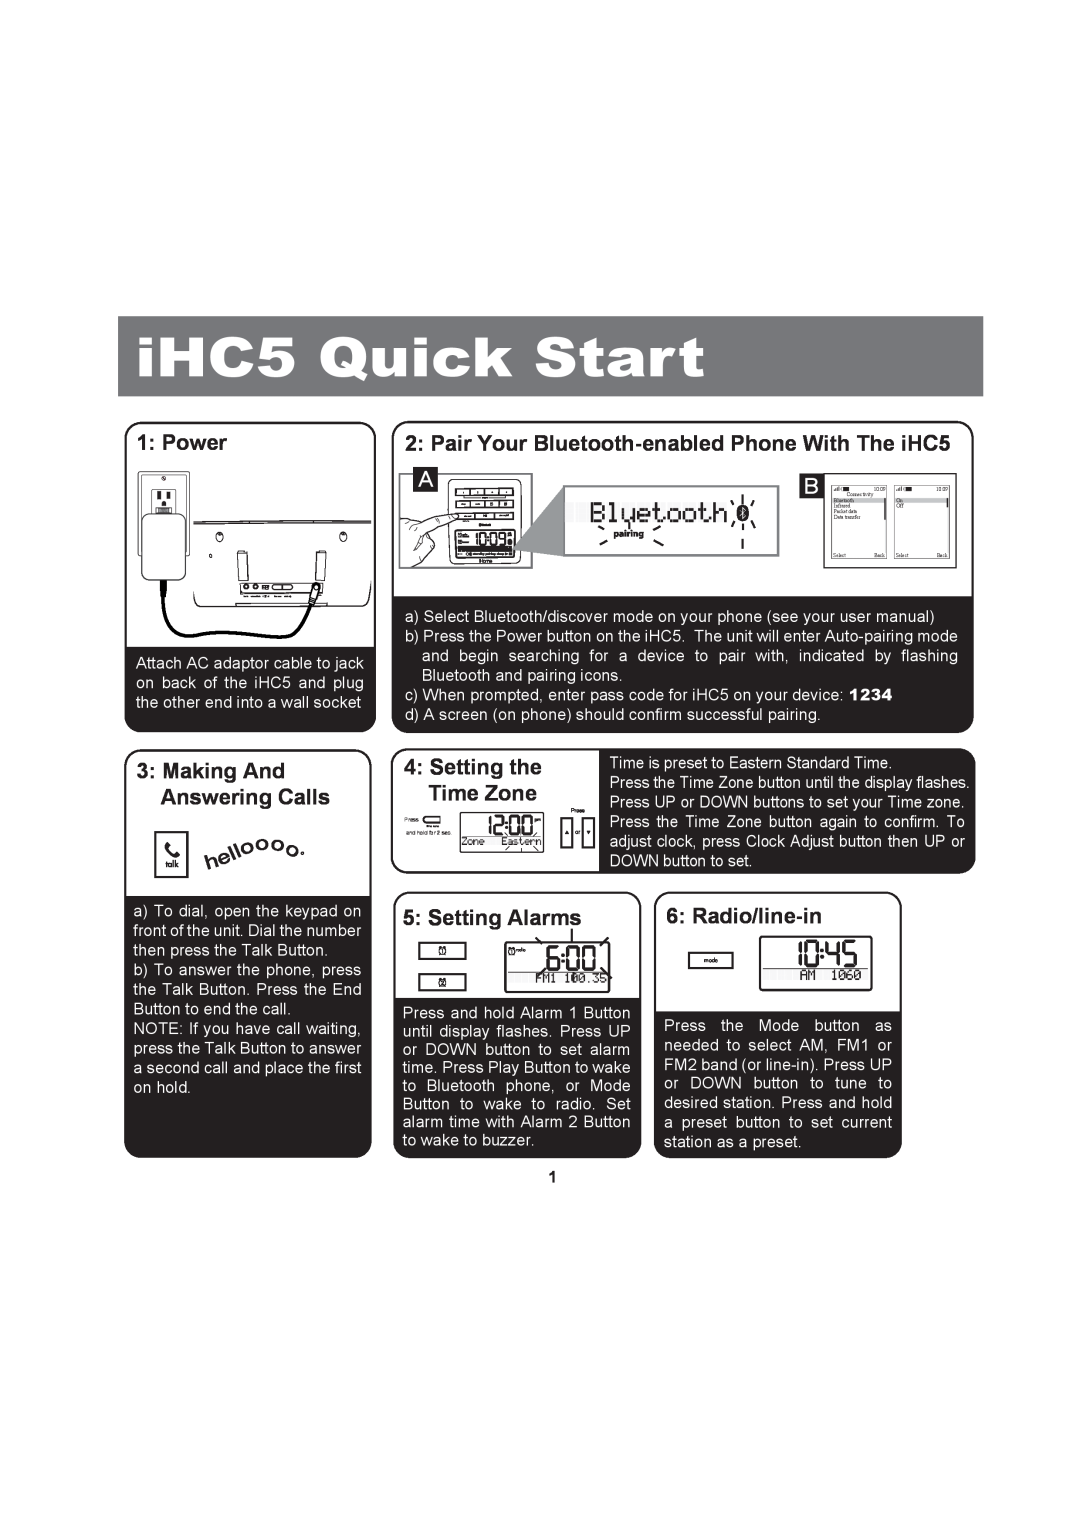 iHome manual Power, Pair Your Bluetooth-enabledPhone With The iHC5, Making And Answering Calls, Setting the Time Zone 